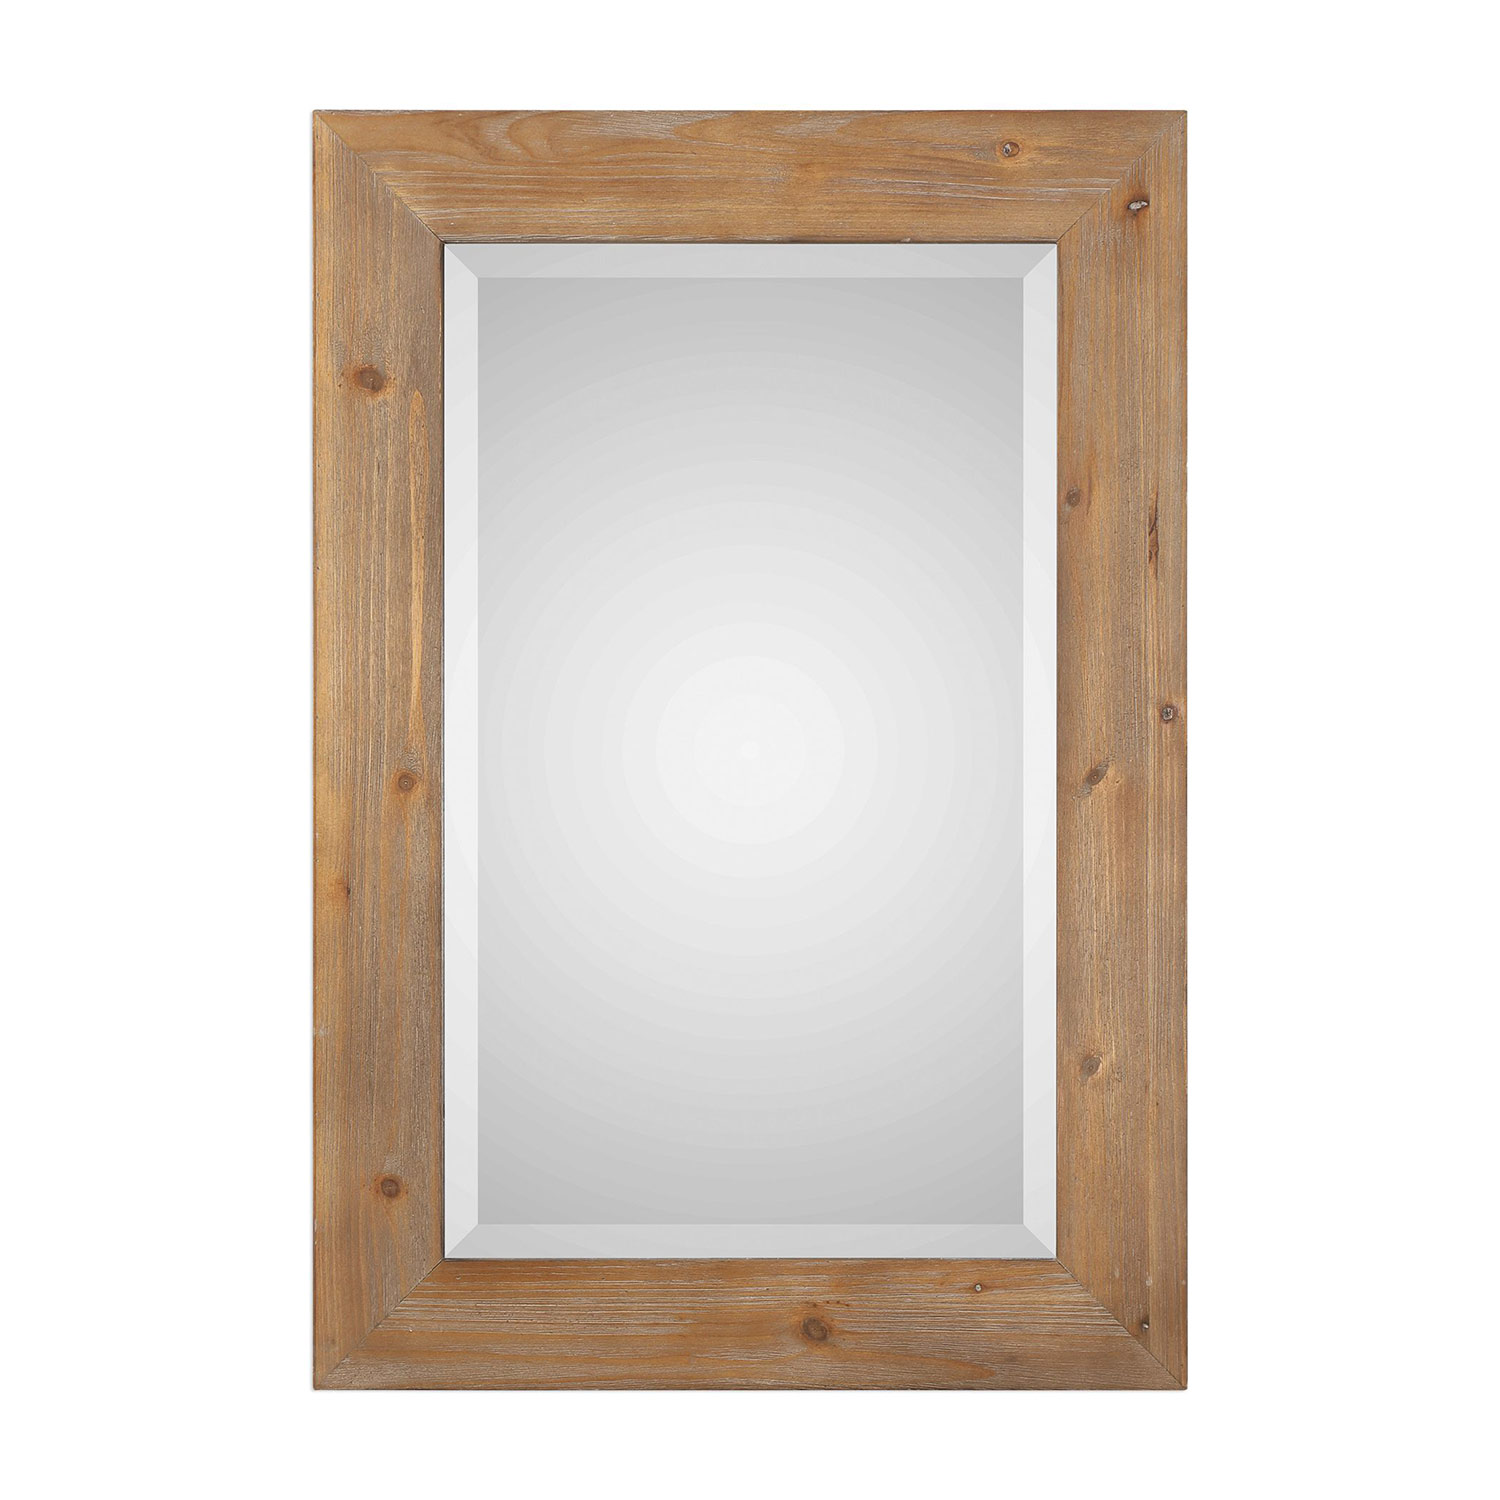 Uttermost Bullock Wood Mirror - Solid Natural